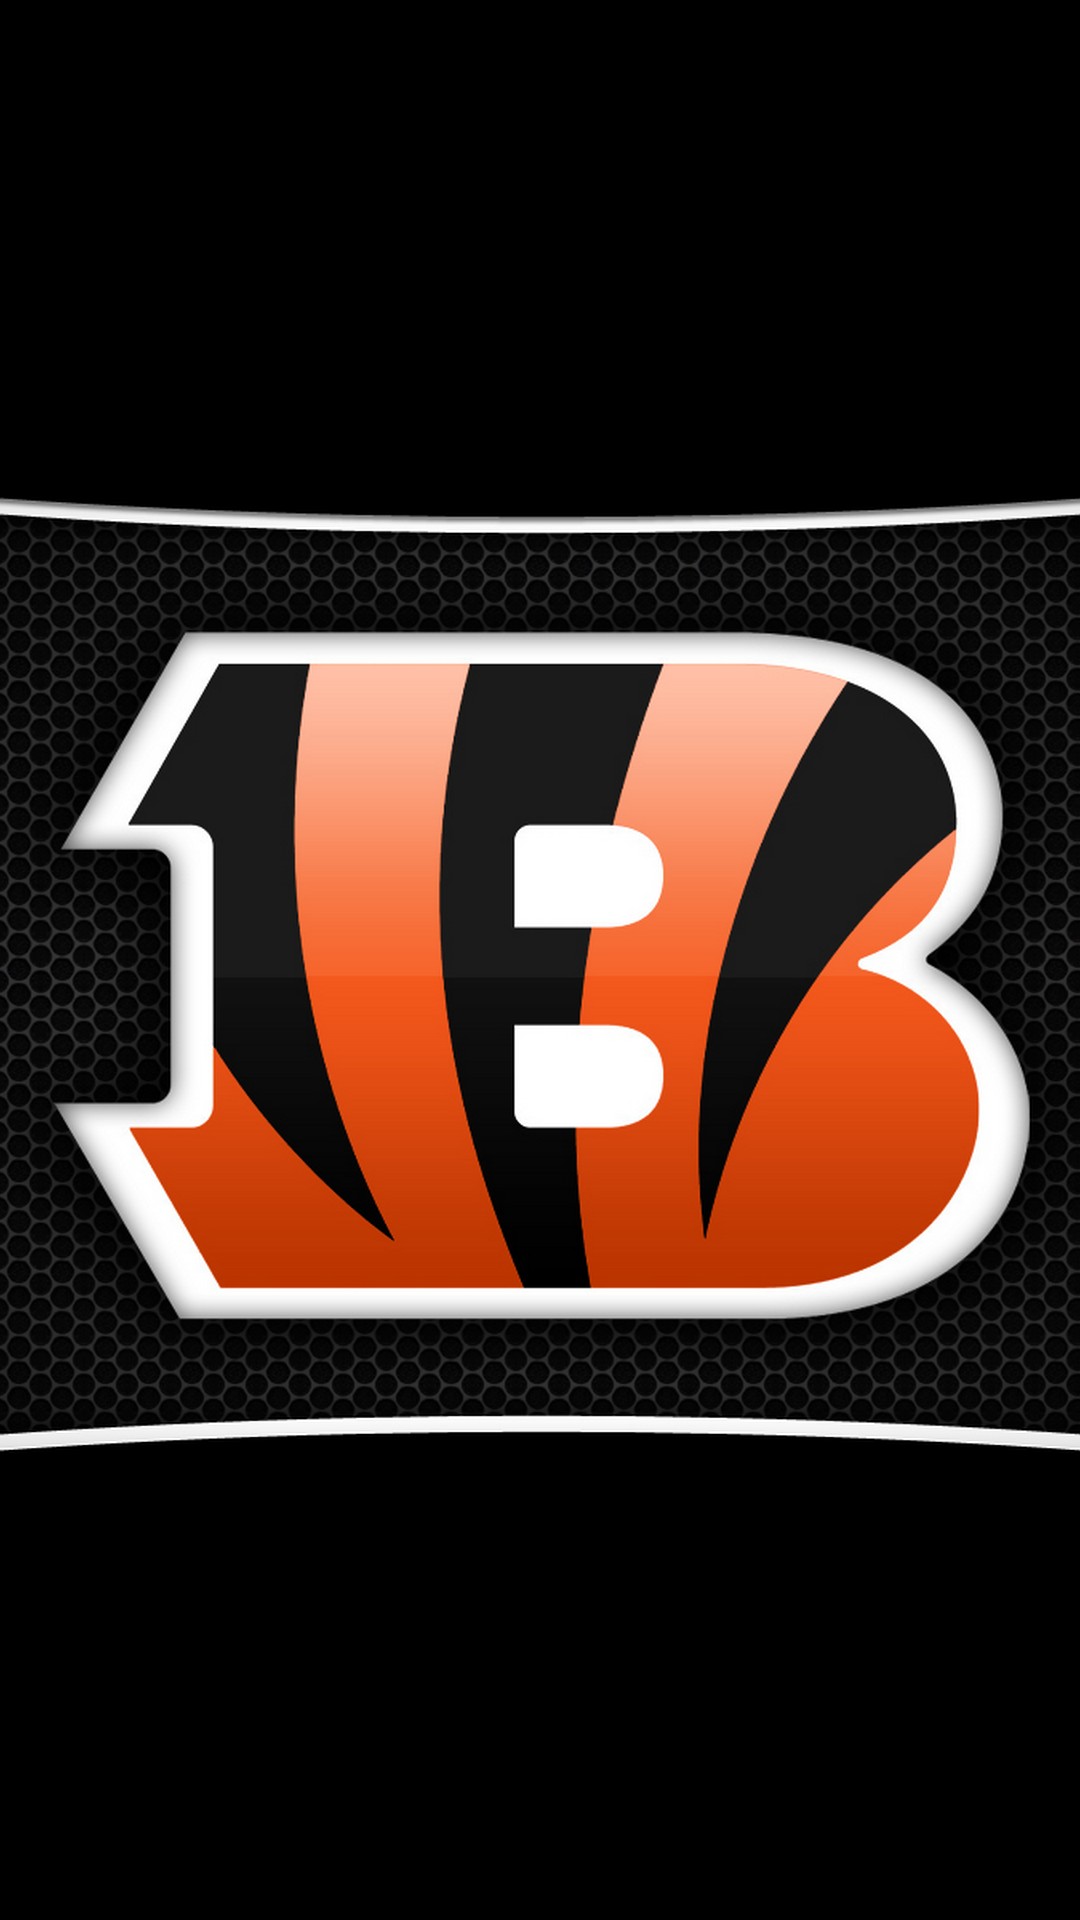 Cincinnati Bengals iPhone Screen Wallpaper with high-resolution 1080x1920 pixel. Donwload and set as wallpaper for your iPhone X, iPhone XS home screen backgrounds, XS Max, XR, iPhone8 lock screen wallpaper, iPhone 7, 6, SE and other mobile devices